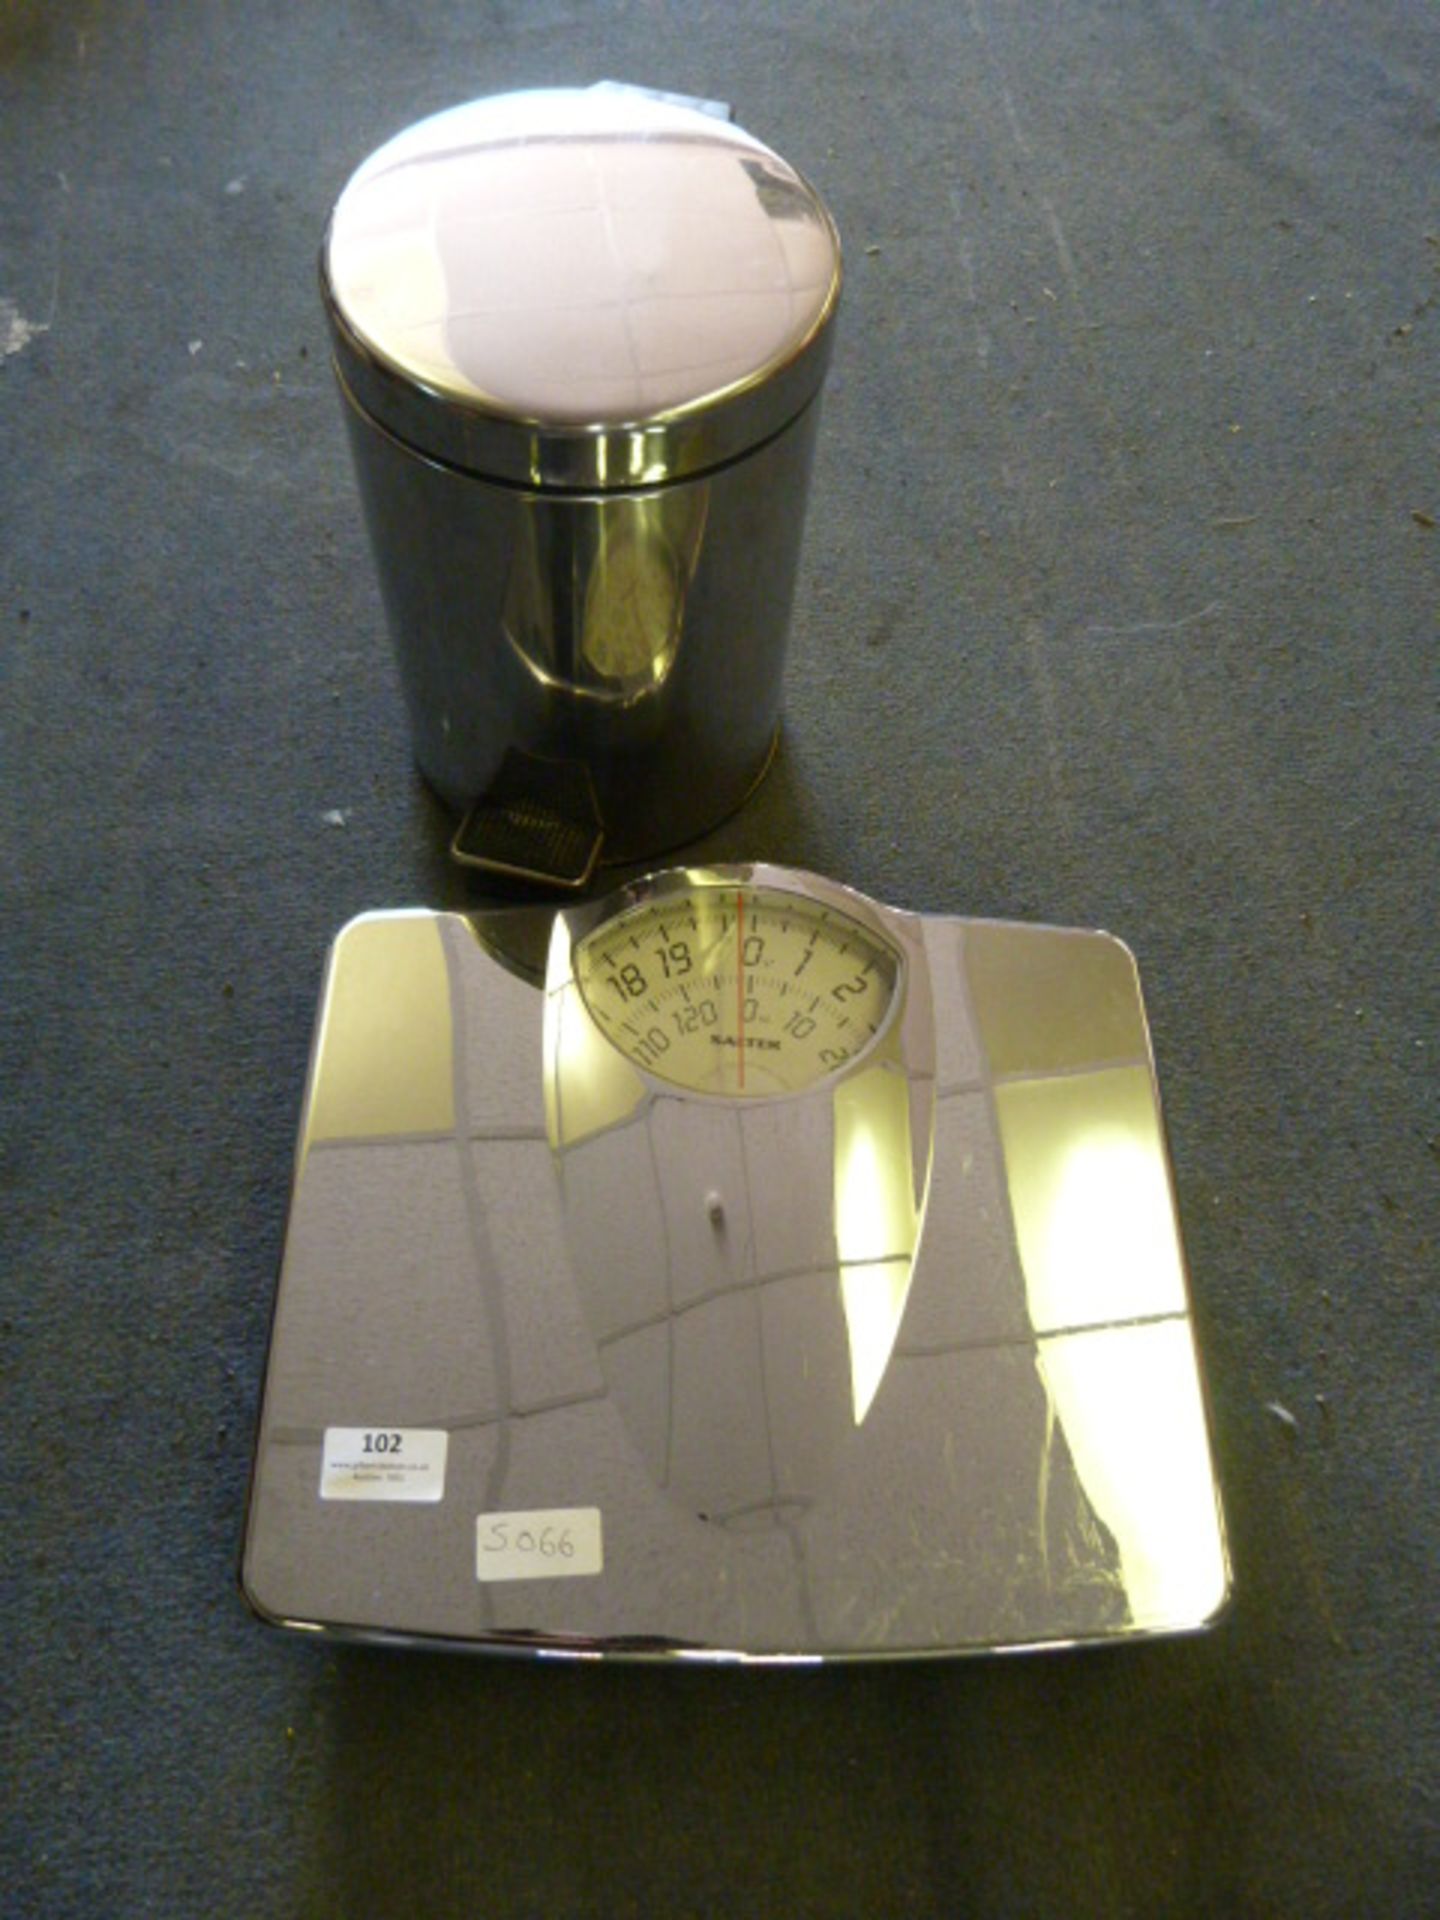 Salter Chrome Bathroom Scales and a Small Pedal Bin